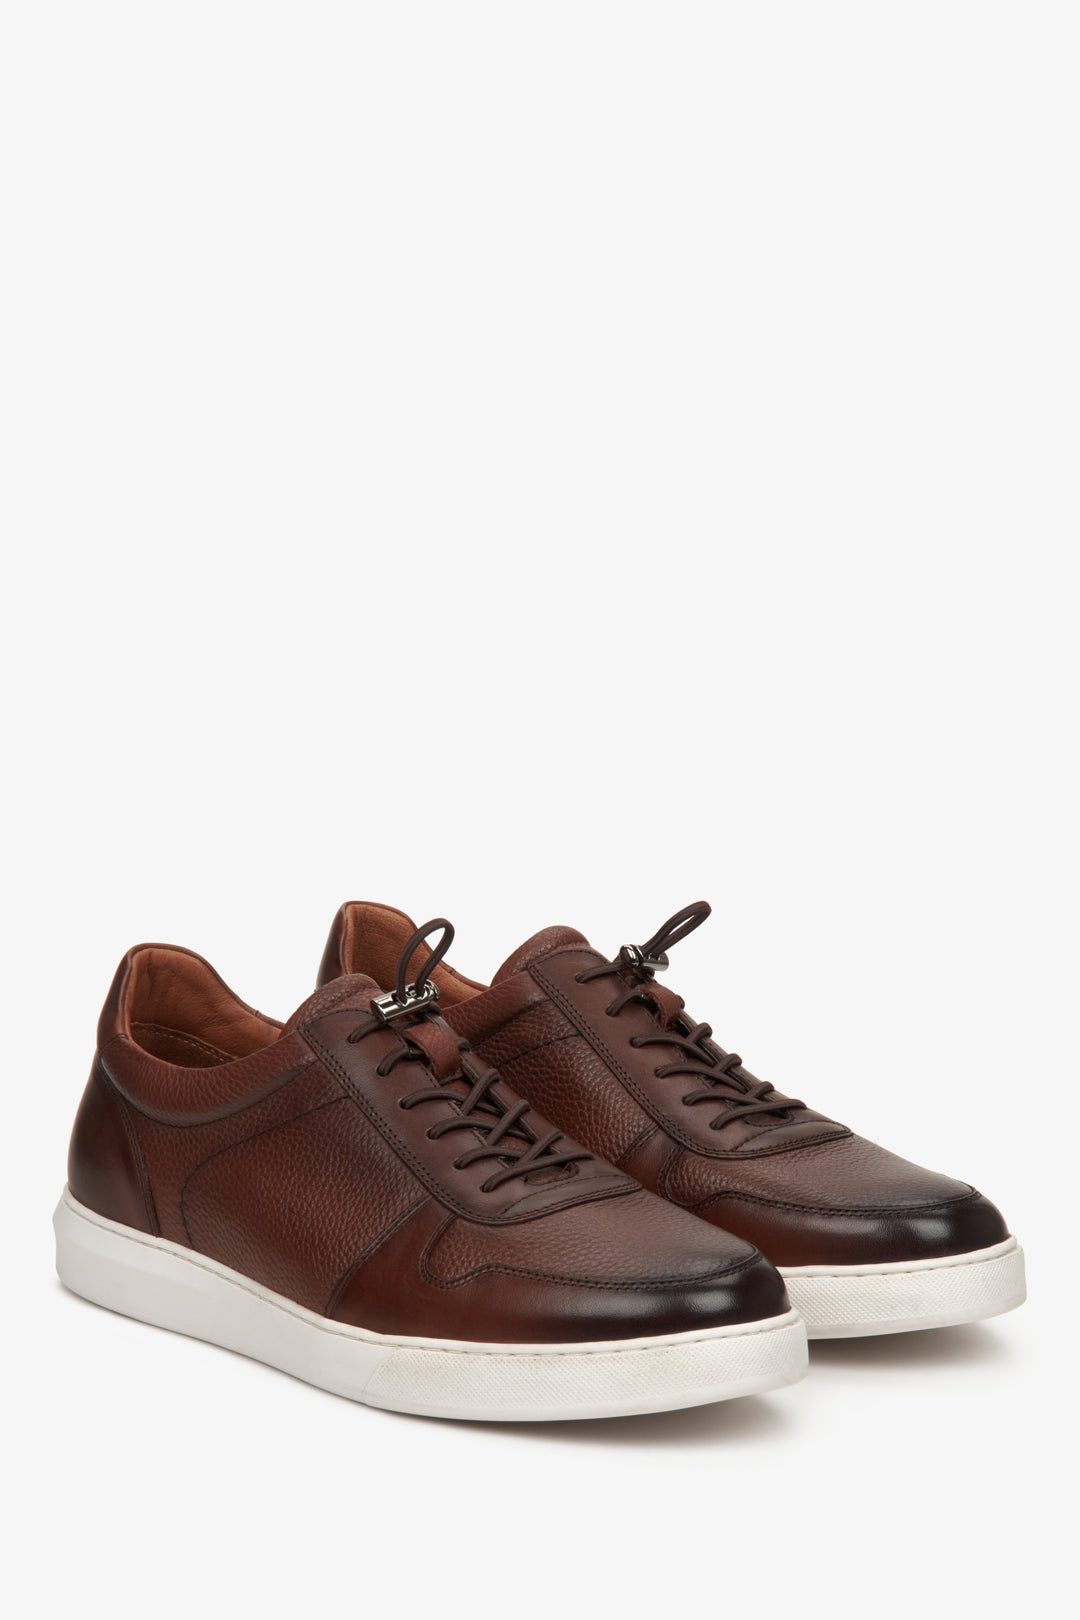 Estro men's brown leather sneakers with an elastic cuff for spring and autumn - presentation of the toe and side seam of the shoe.